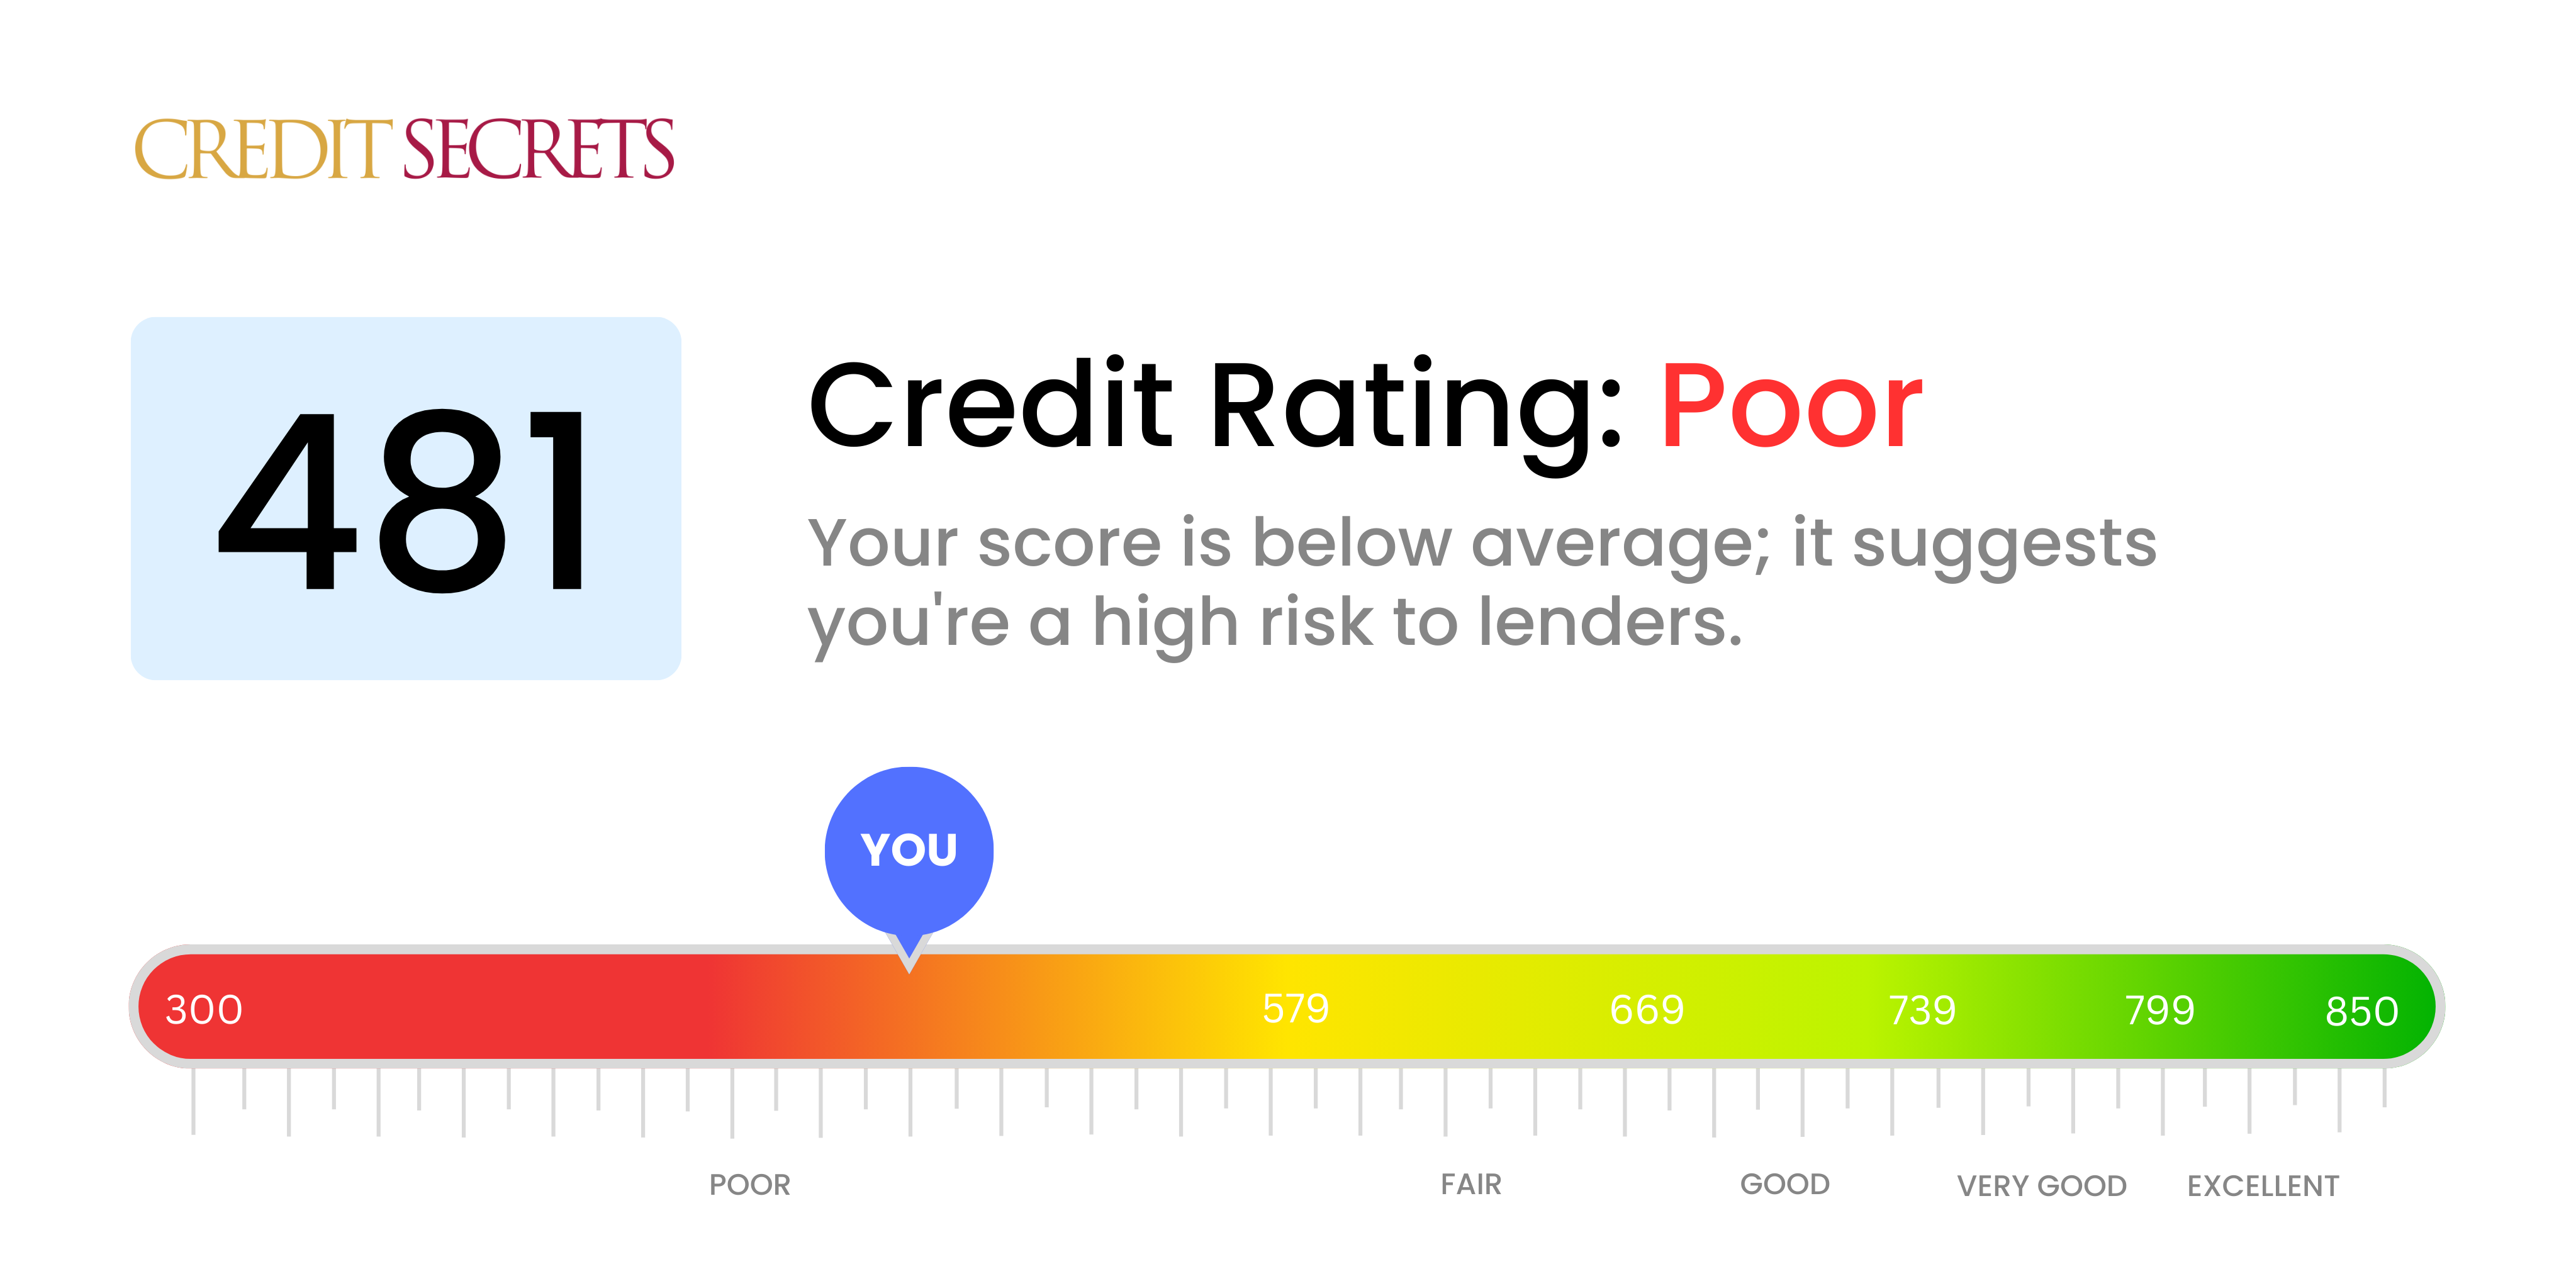 Is 481 a good credit score?